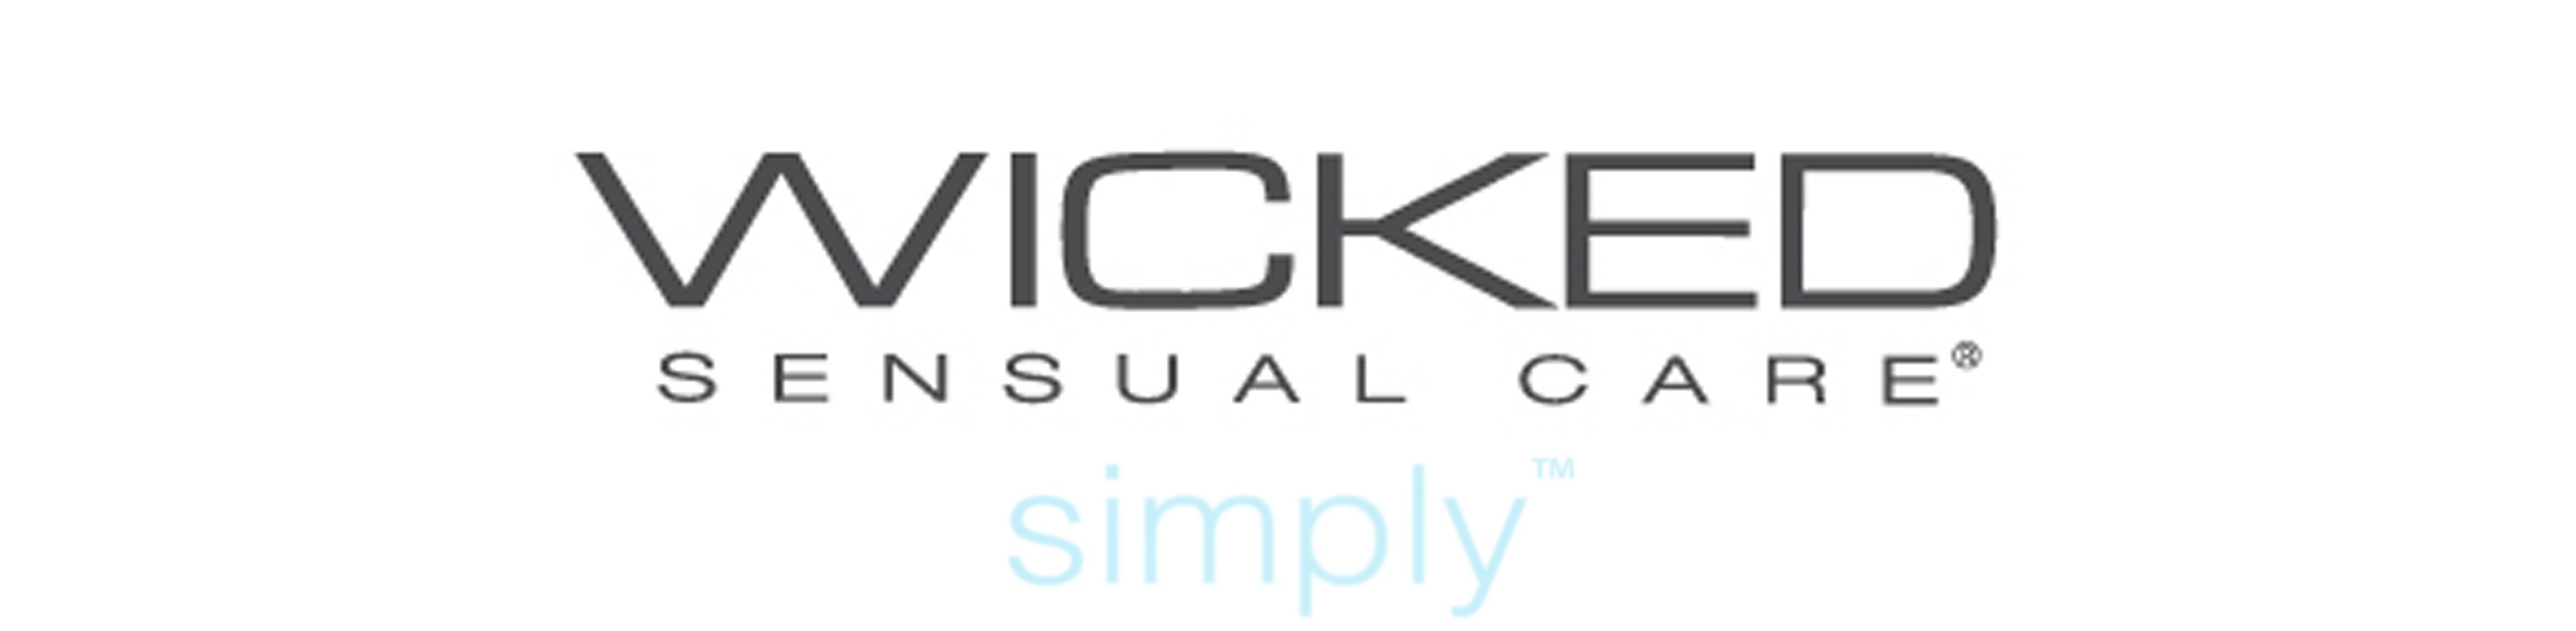 Wicked Sensual Care Header image 